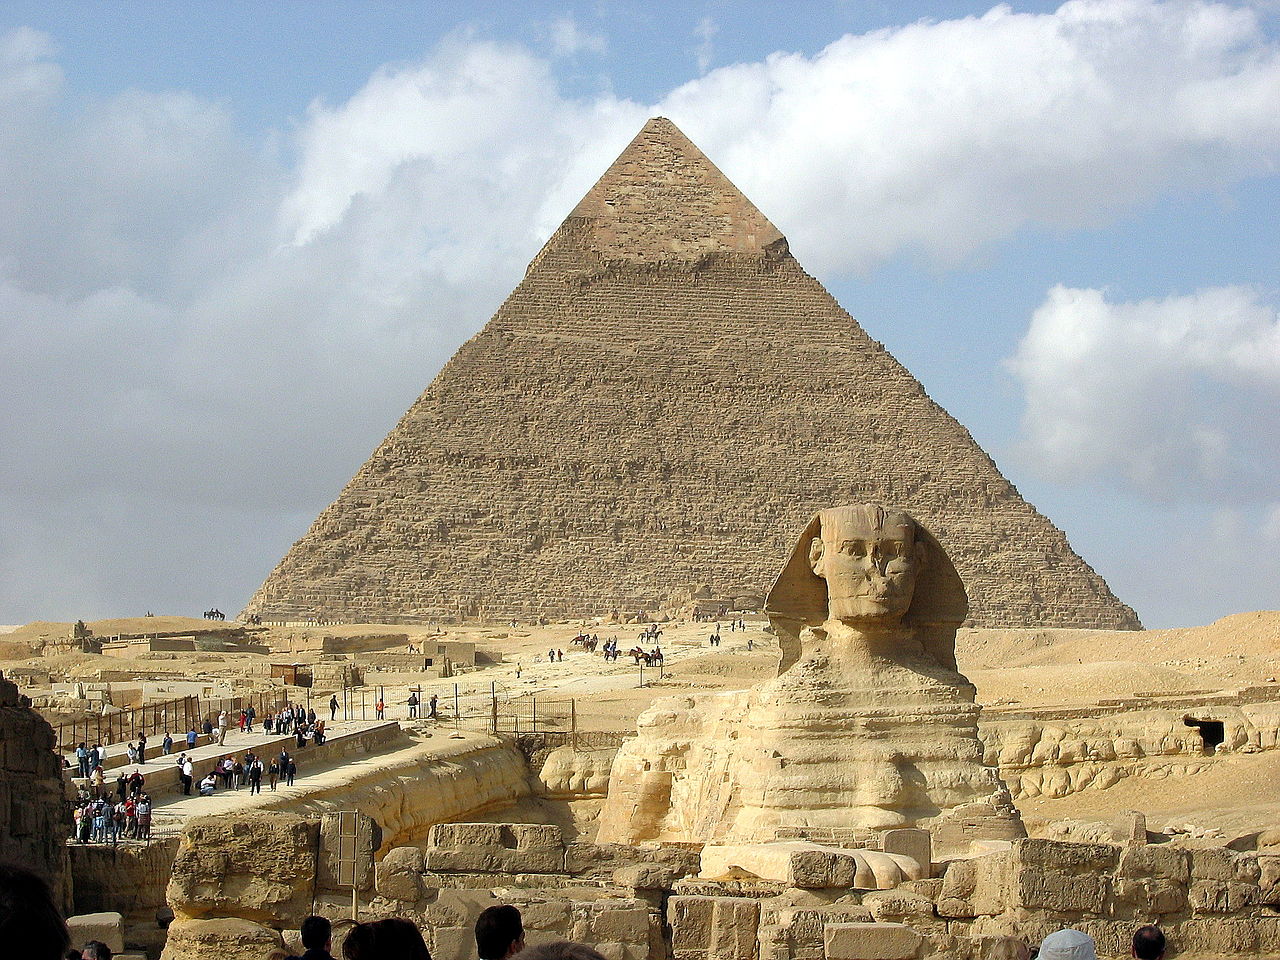 The Second Pyramid of Giza.